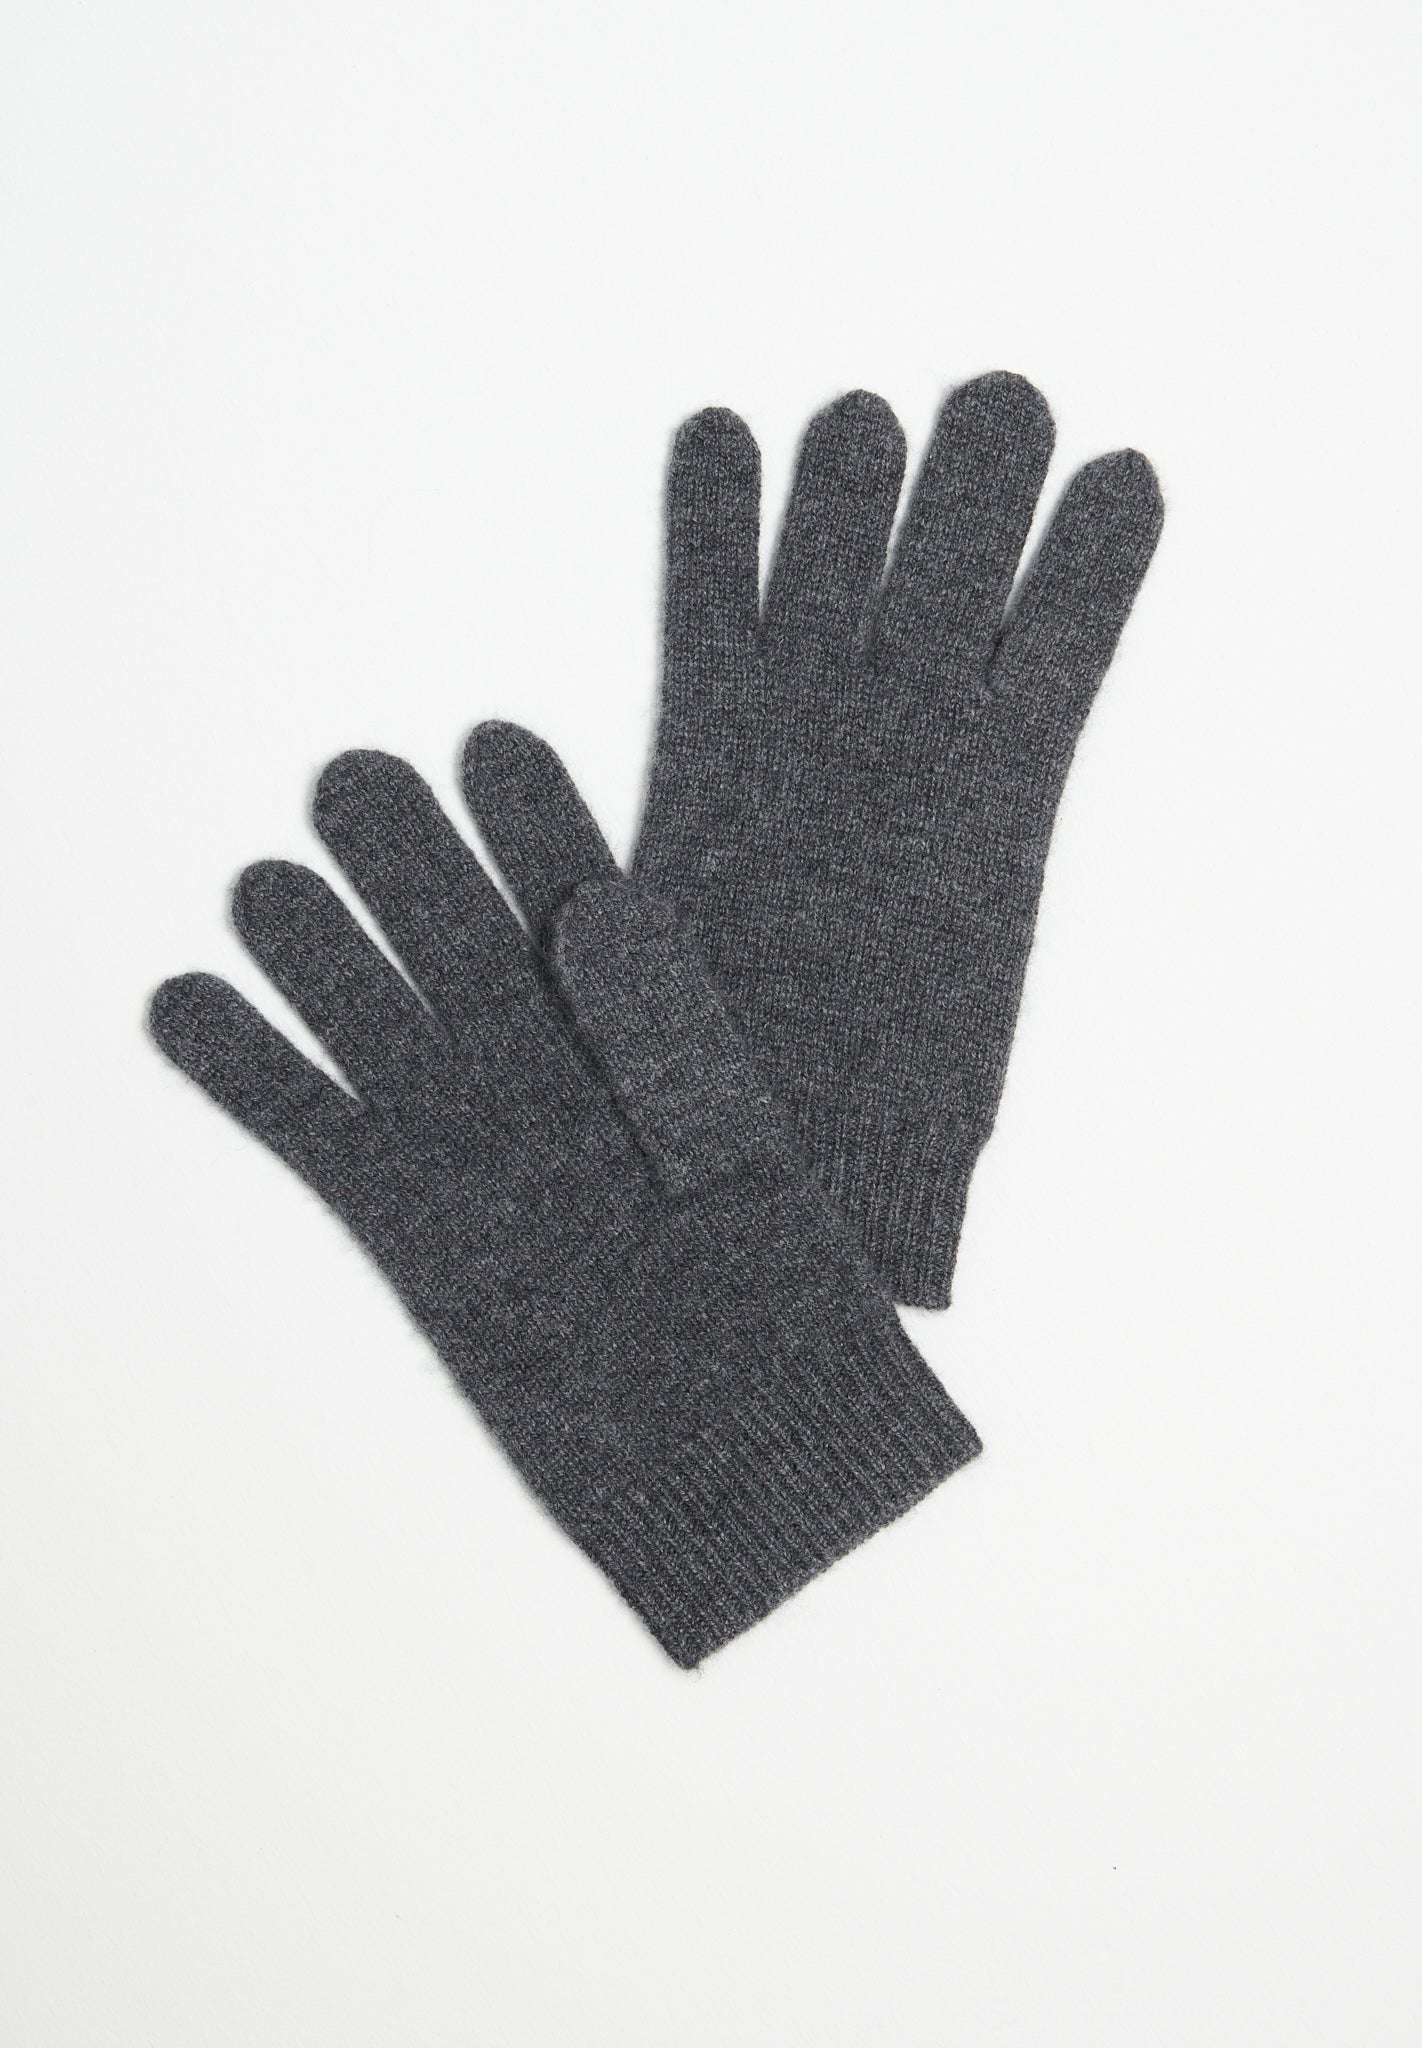 Charcoal gray 4-thread cashmere gloves